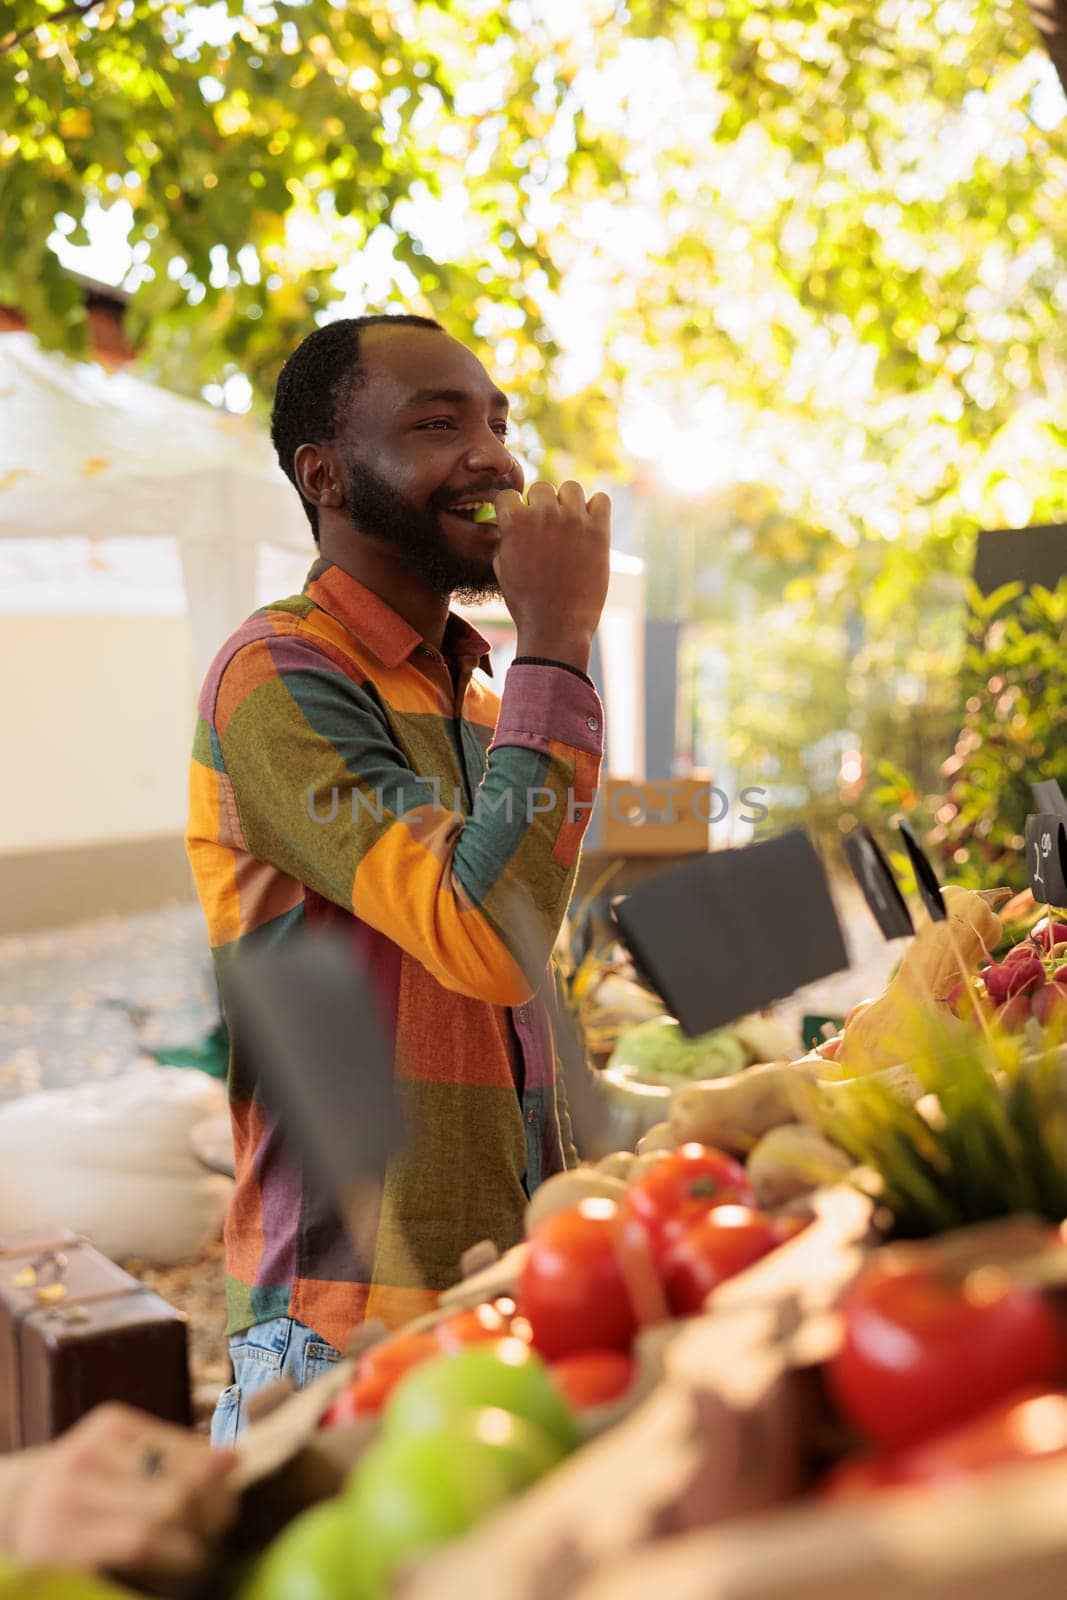 Smiling male person tasting apple before buying bio produce by DCStudio